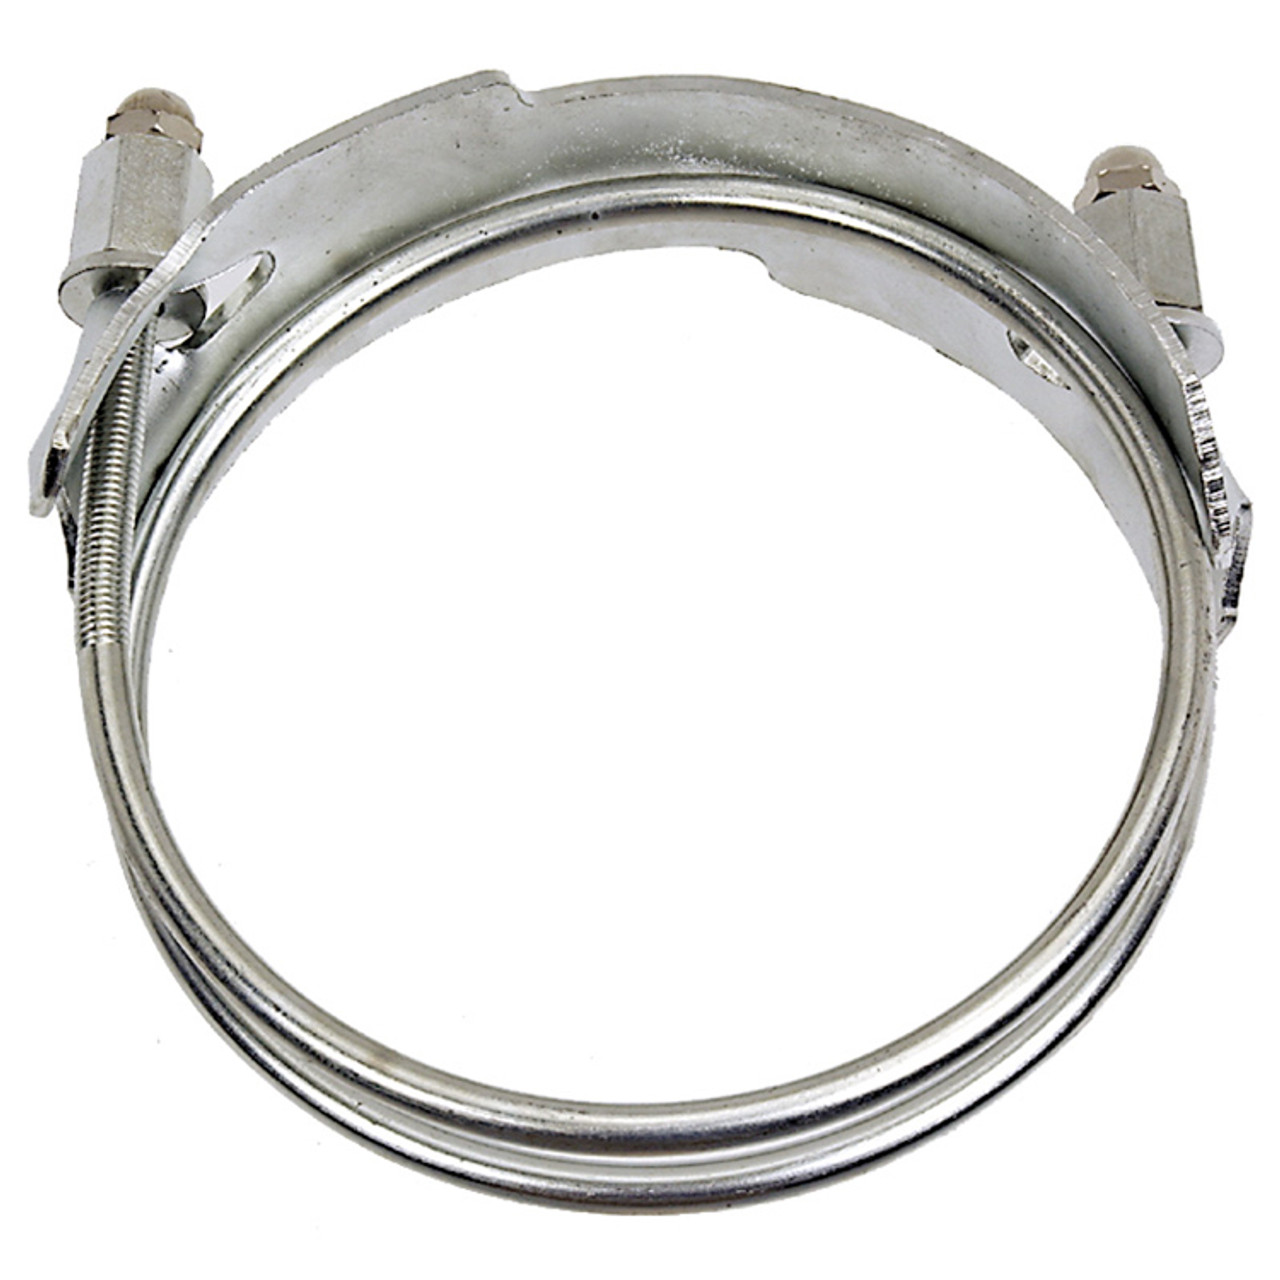 4" Counter-Clockwise Spiral Bolt Clamp  G38W-400